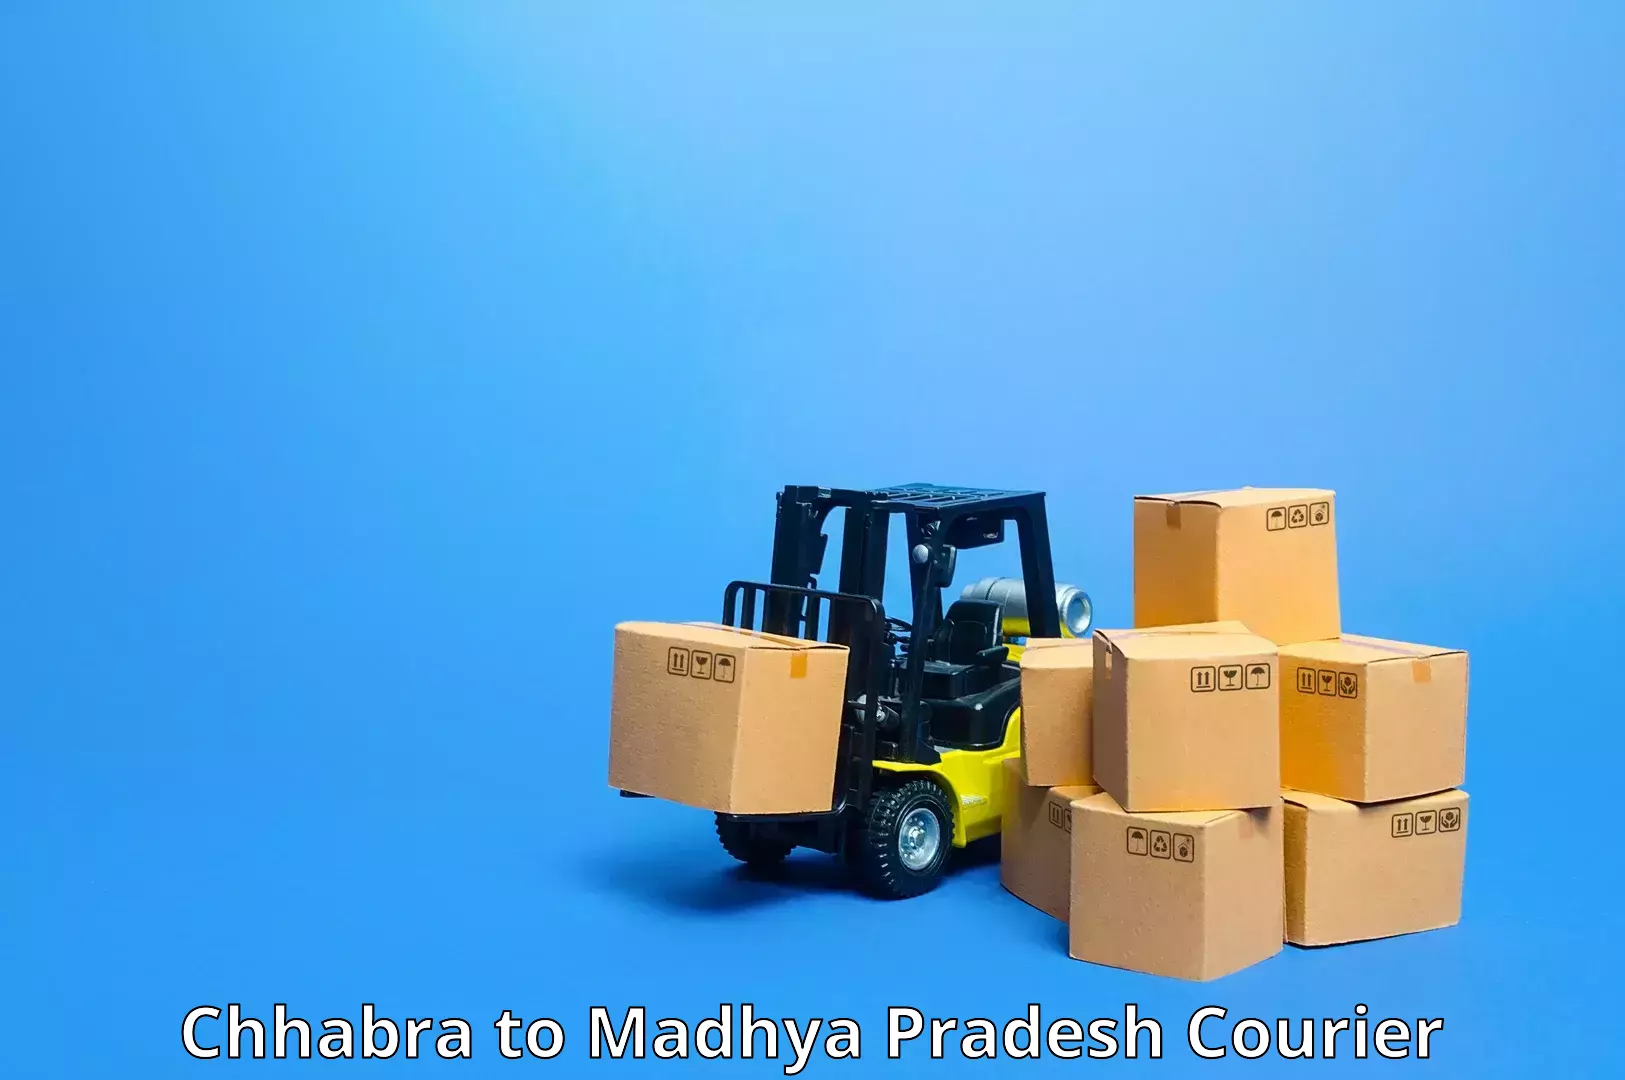 Express delivery capabilities Chhabra to Jawad Neemuch